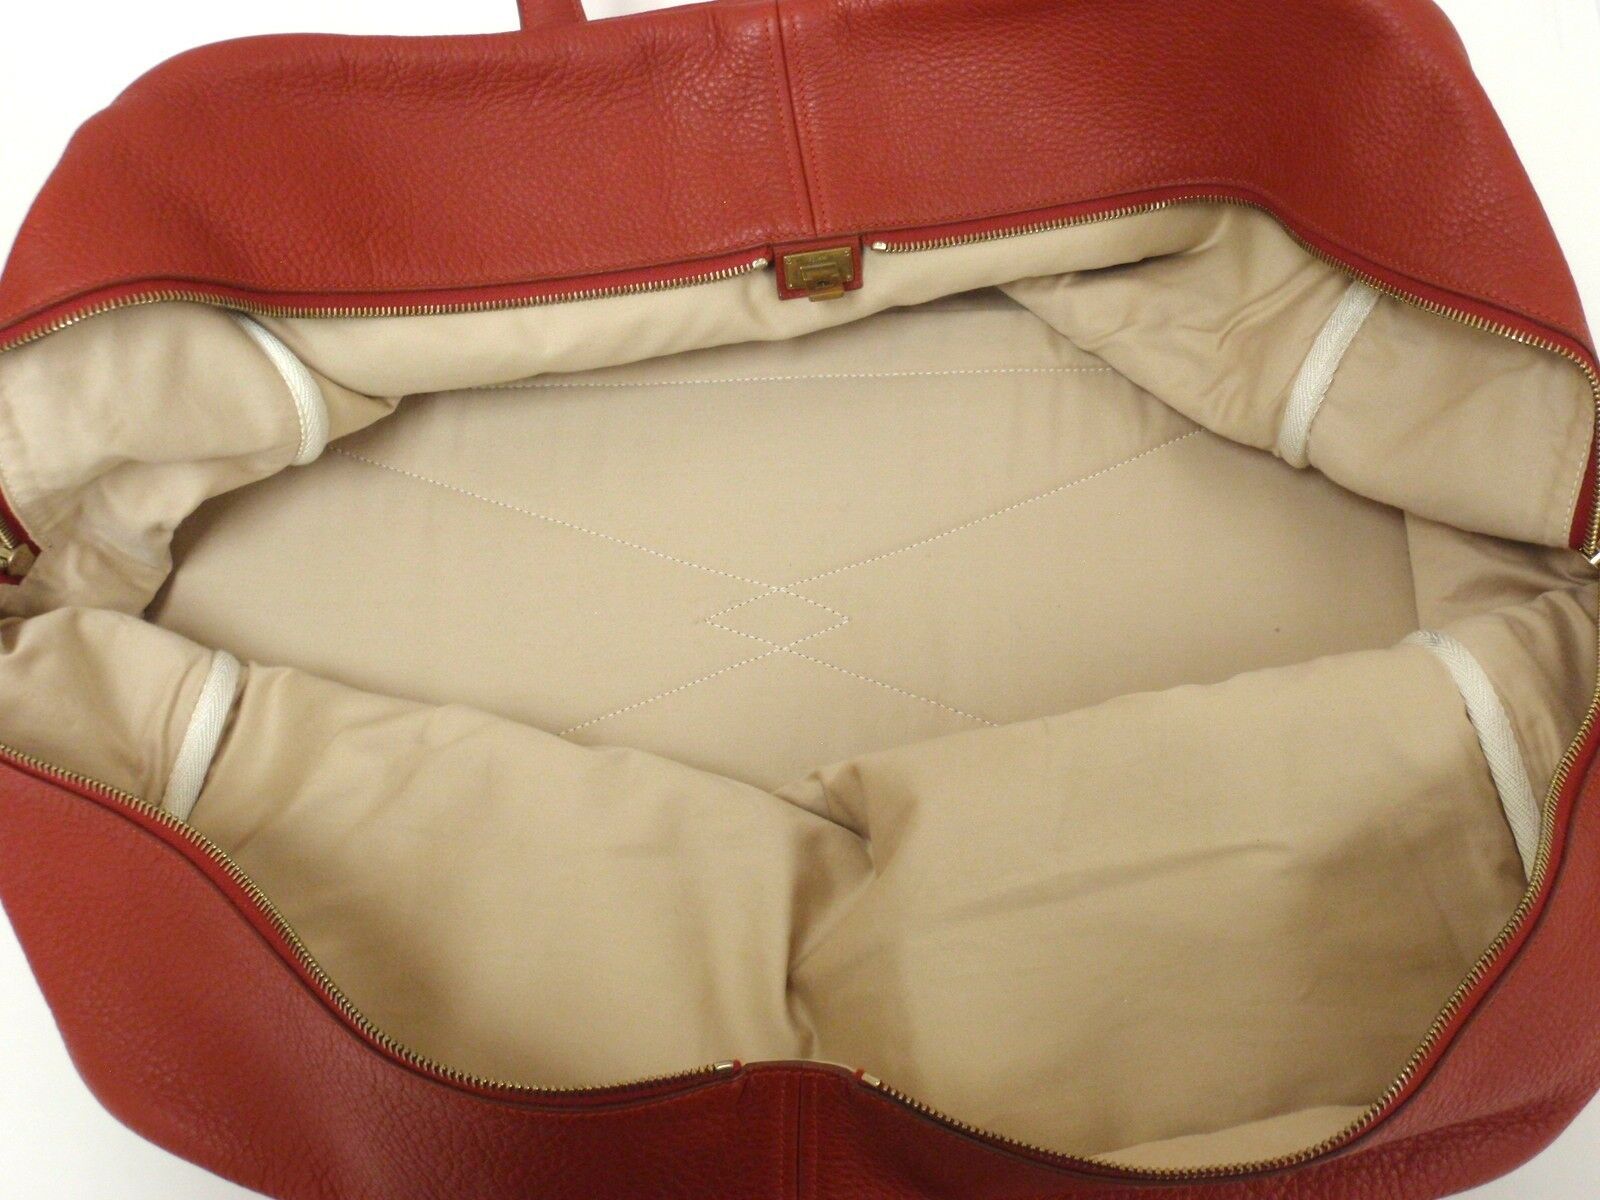 Hermes Clothing, Shoes & Accessories:Women:Women's Bags & Handbags AUTHENTIC! HERMES 50CM VICTORIA RED CLEMENCE TRAVEL TOTE GHW HANDBAG, YEAR 1998